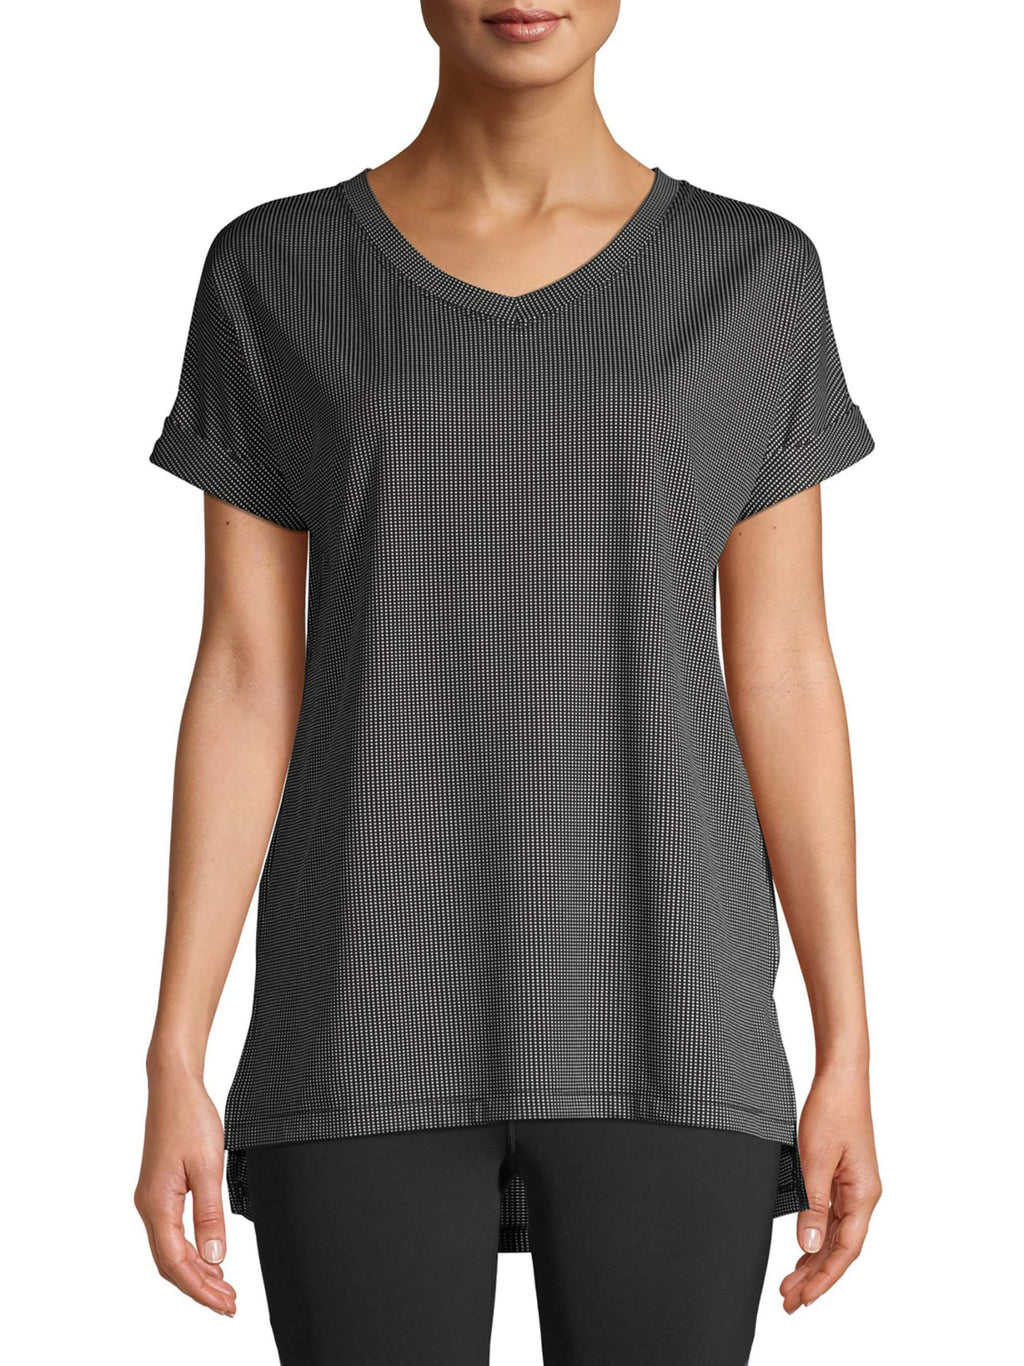 Avia Women's Perforated Performance T-Shirt with Short Sleeves, Sizes  S-XXXL 